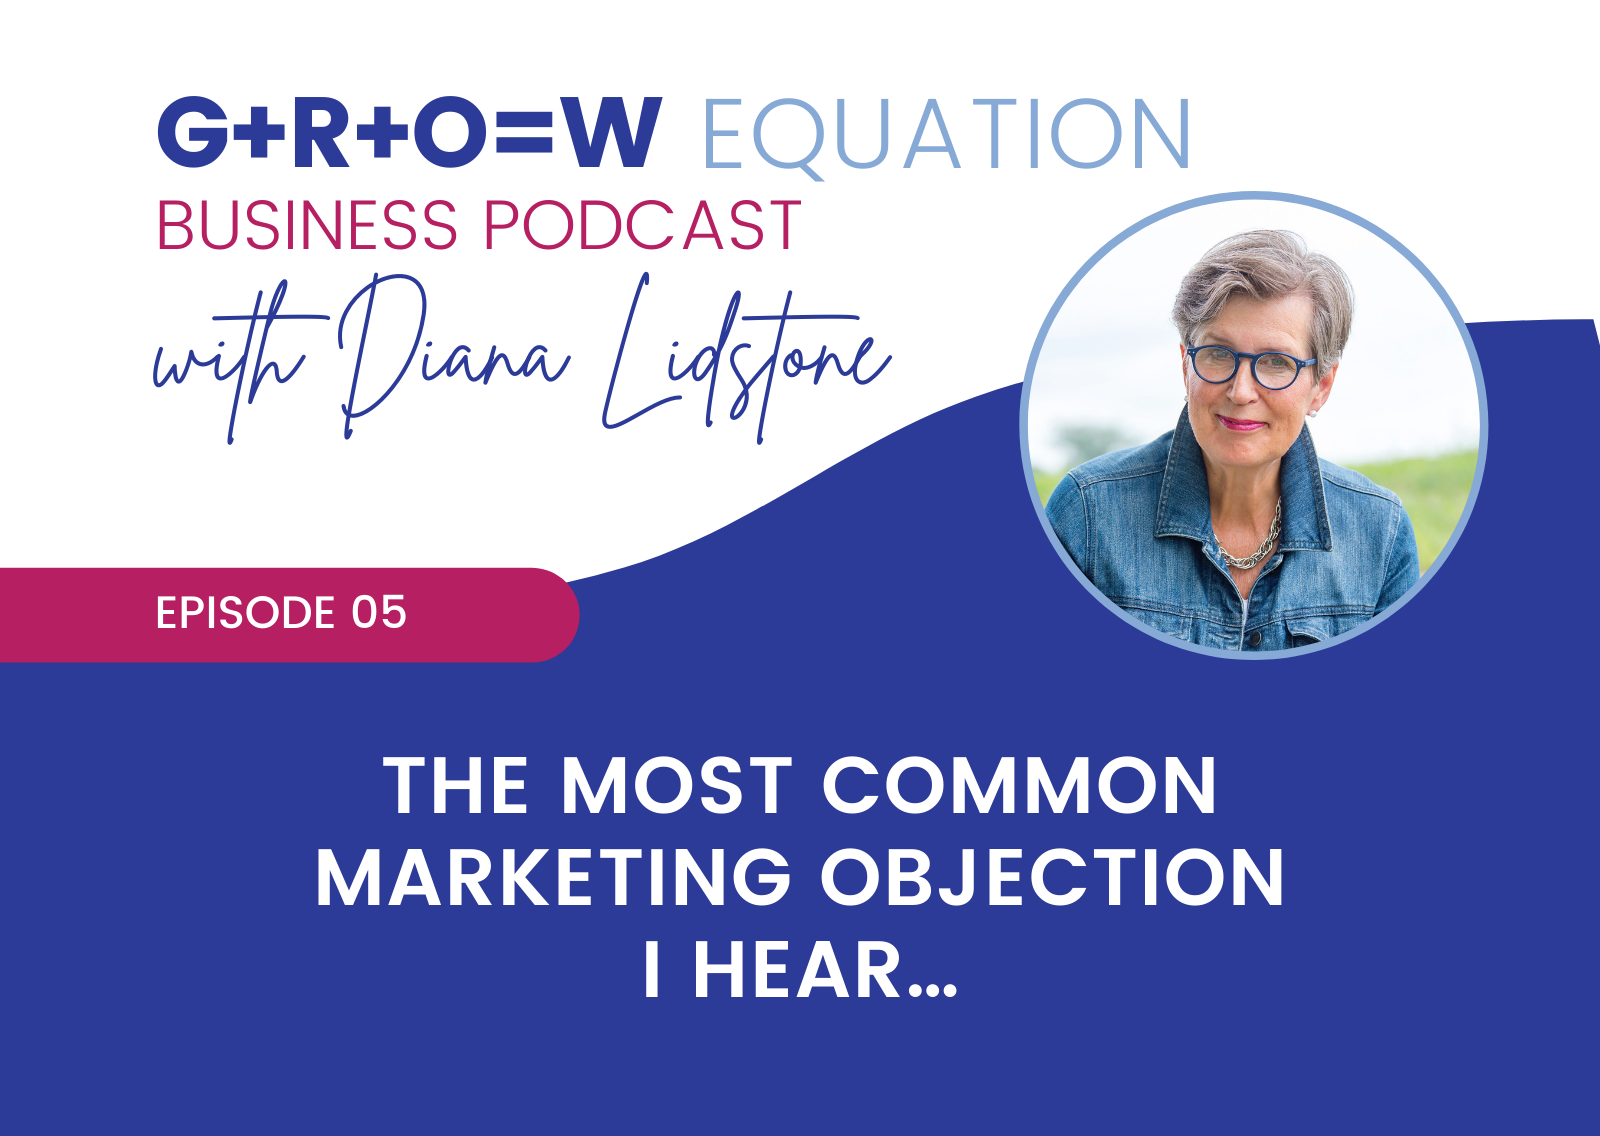 The Most Common Marketing Objection I Hear…